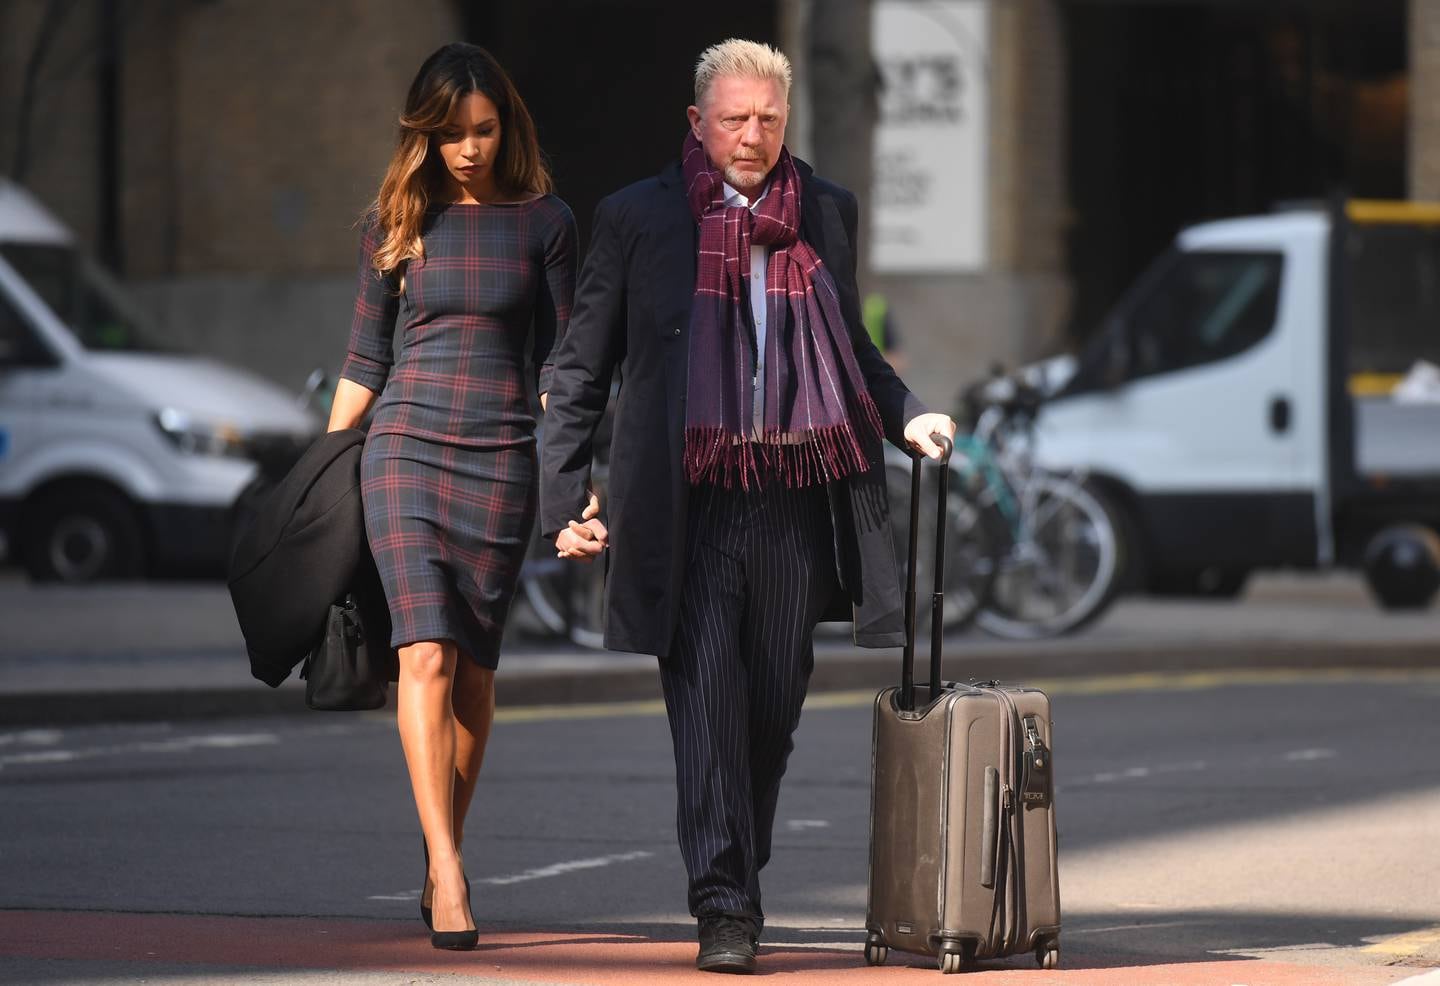 Former Wimbledon Champion and sports commentator Boris Becker arrives with his partner Lillian de Carvalho at Southwark Crown Court in London. EPA